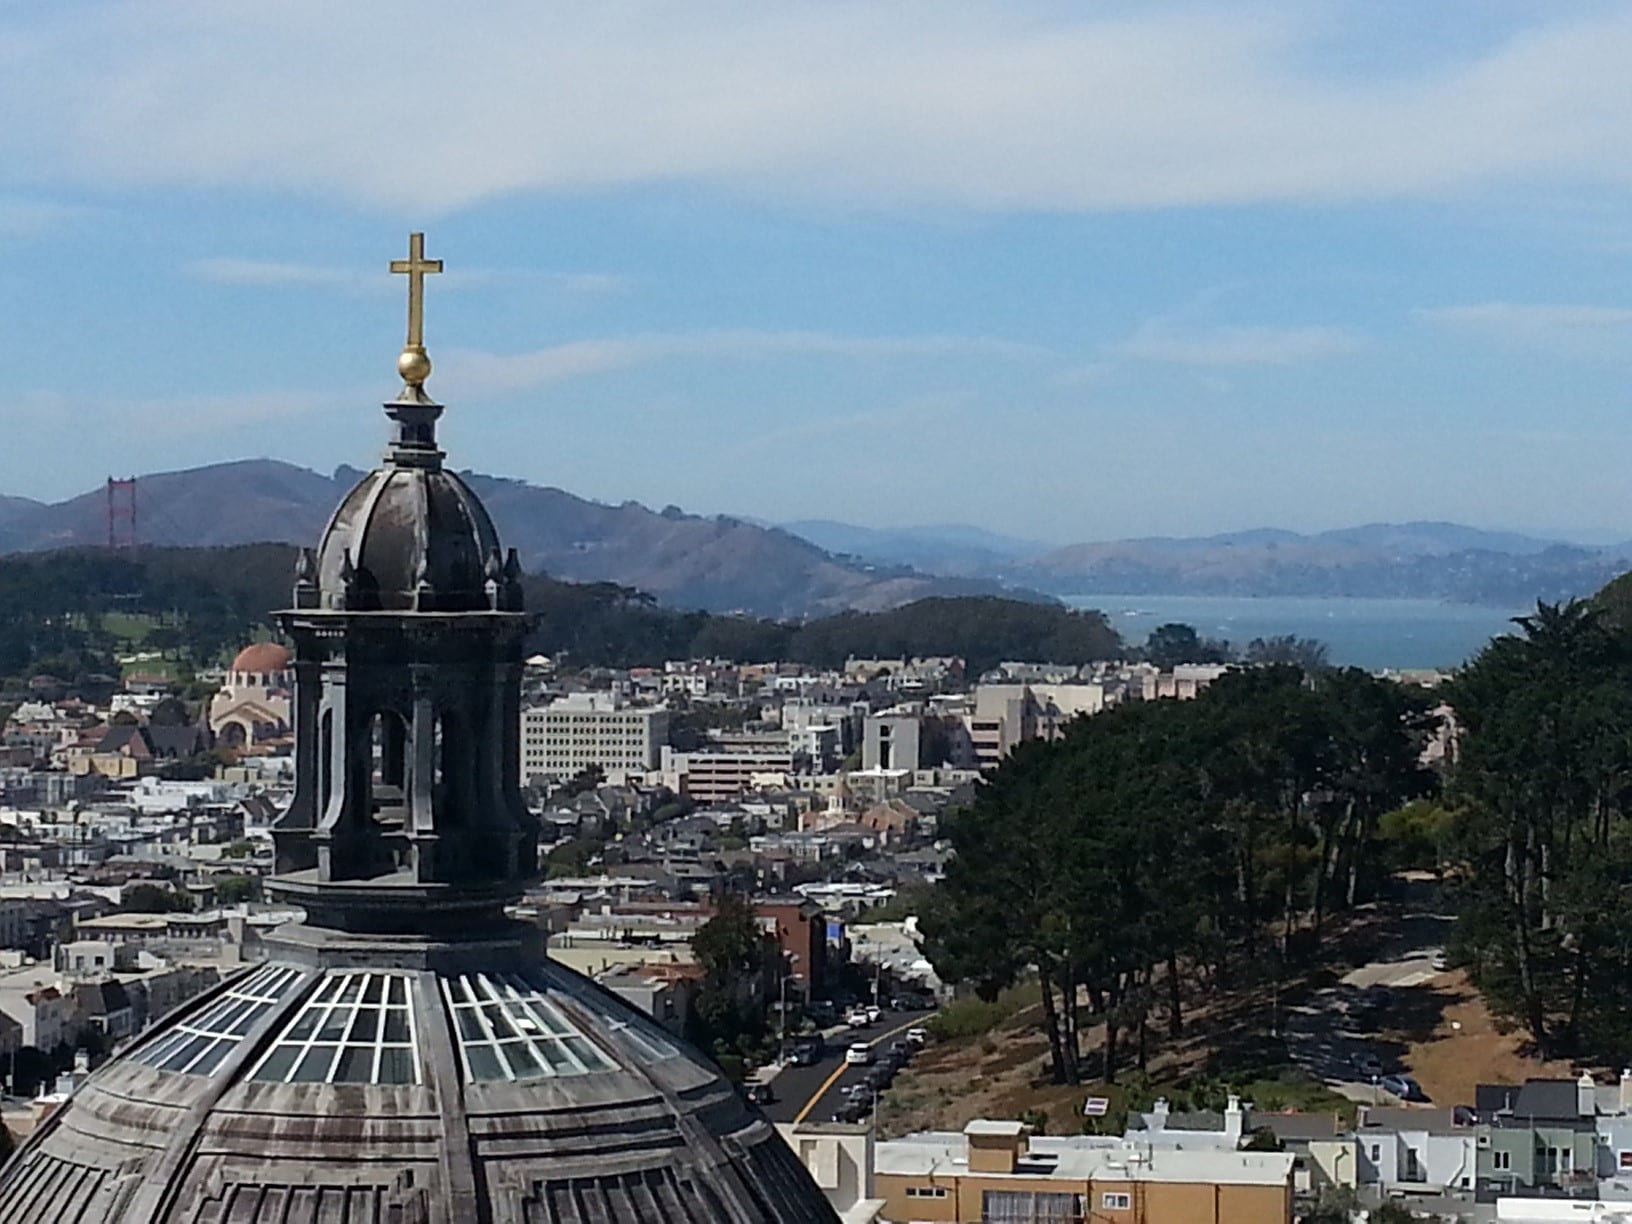 The main dome of Saint Ignatius with views of the city and Golden Gate Bridge as backdrop. Jaw Dropping!!